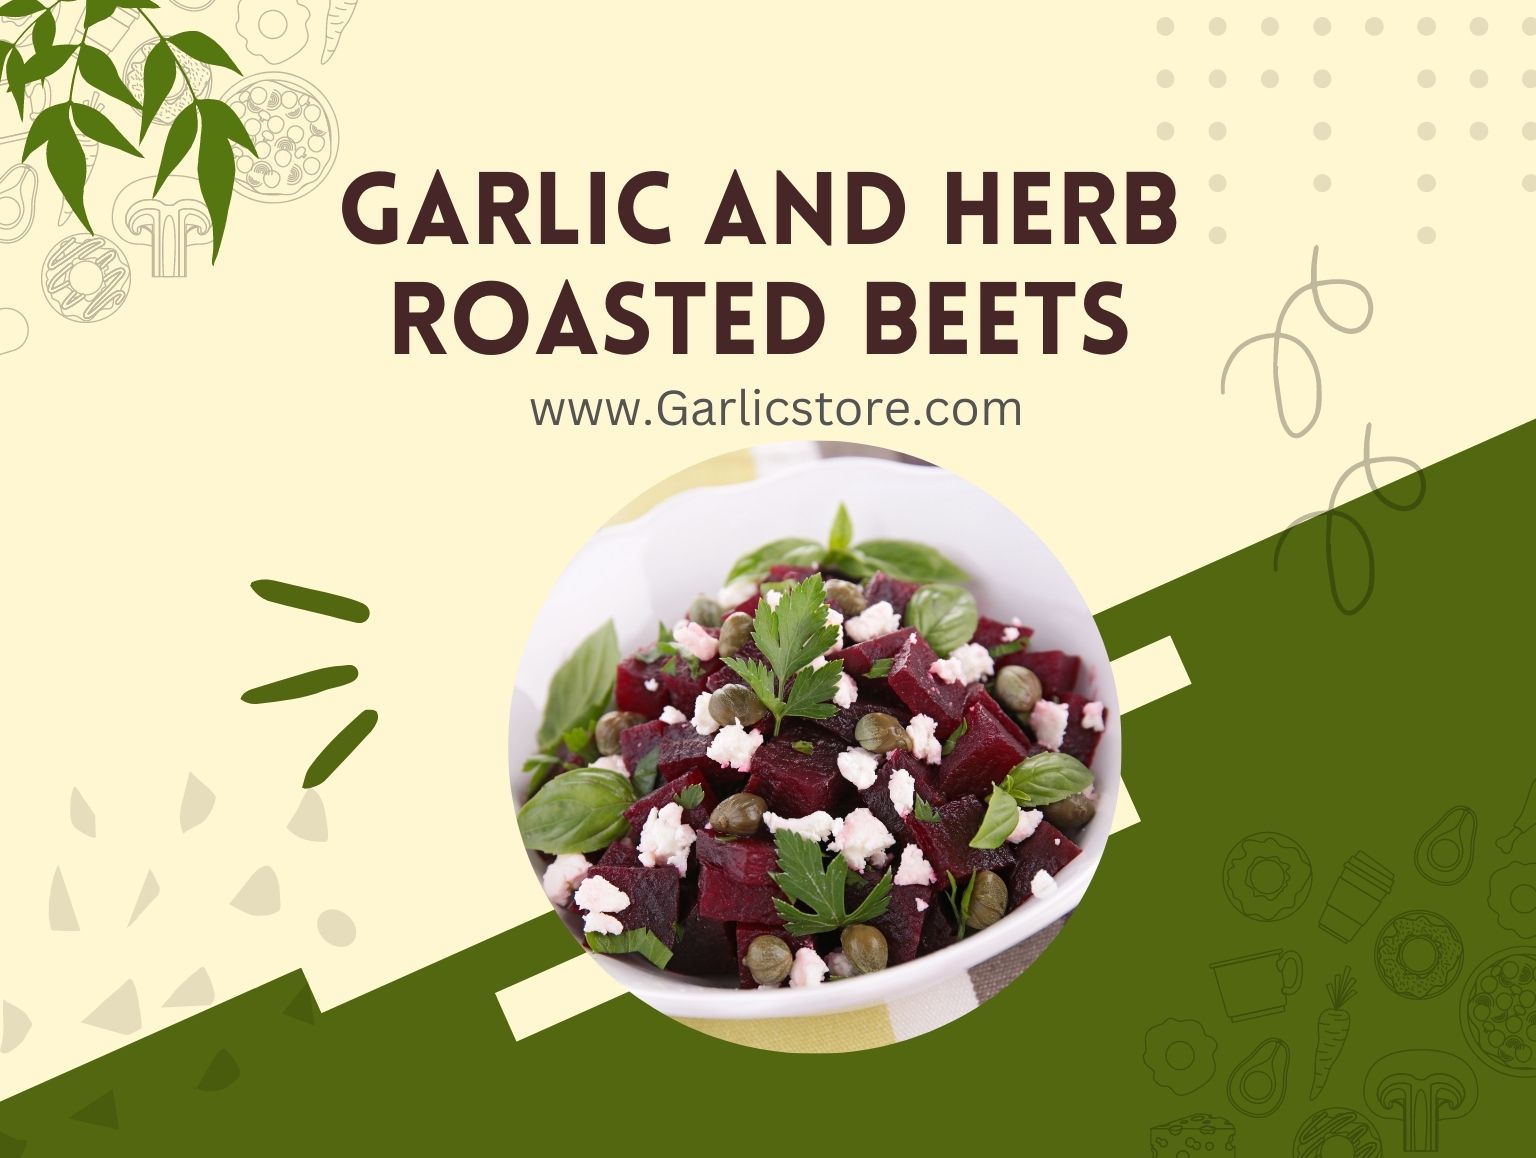 Garlic and Herb Roasted Beets